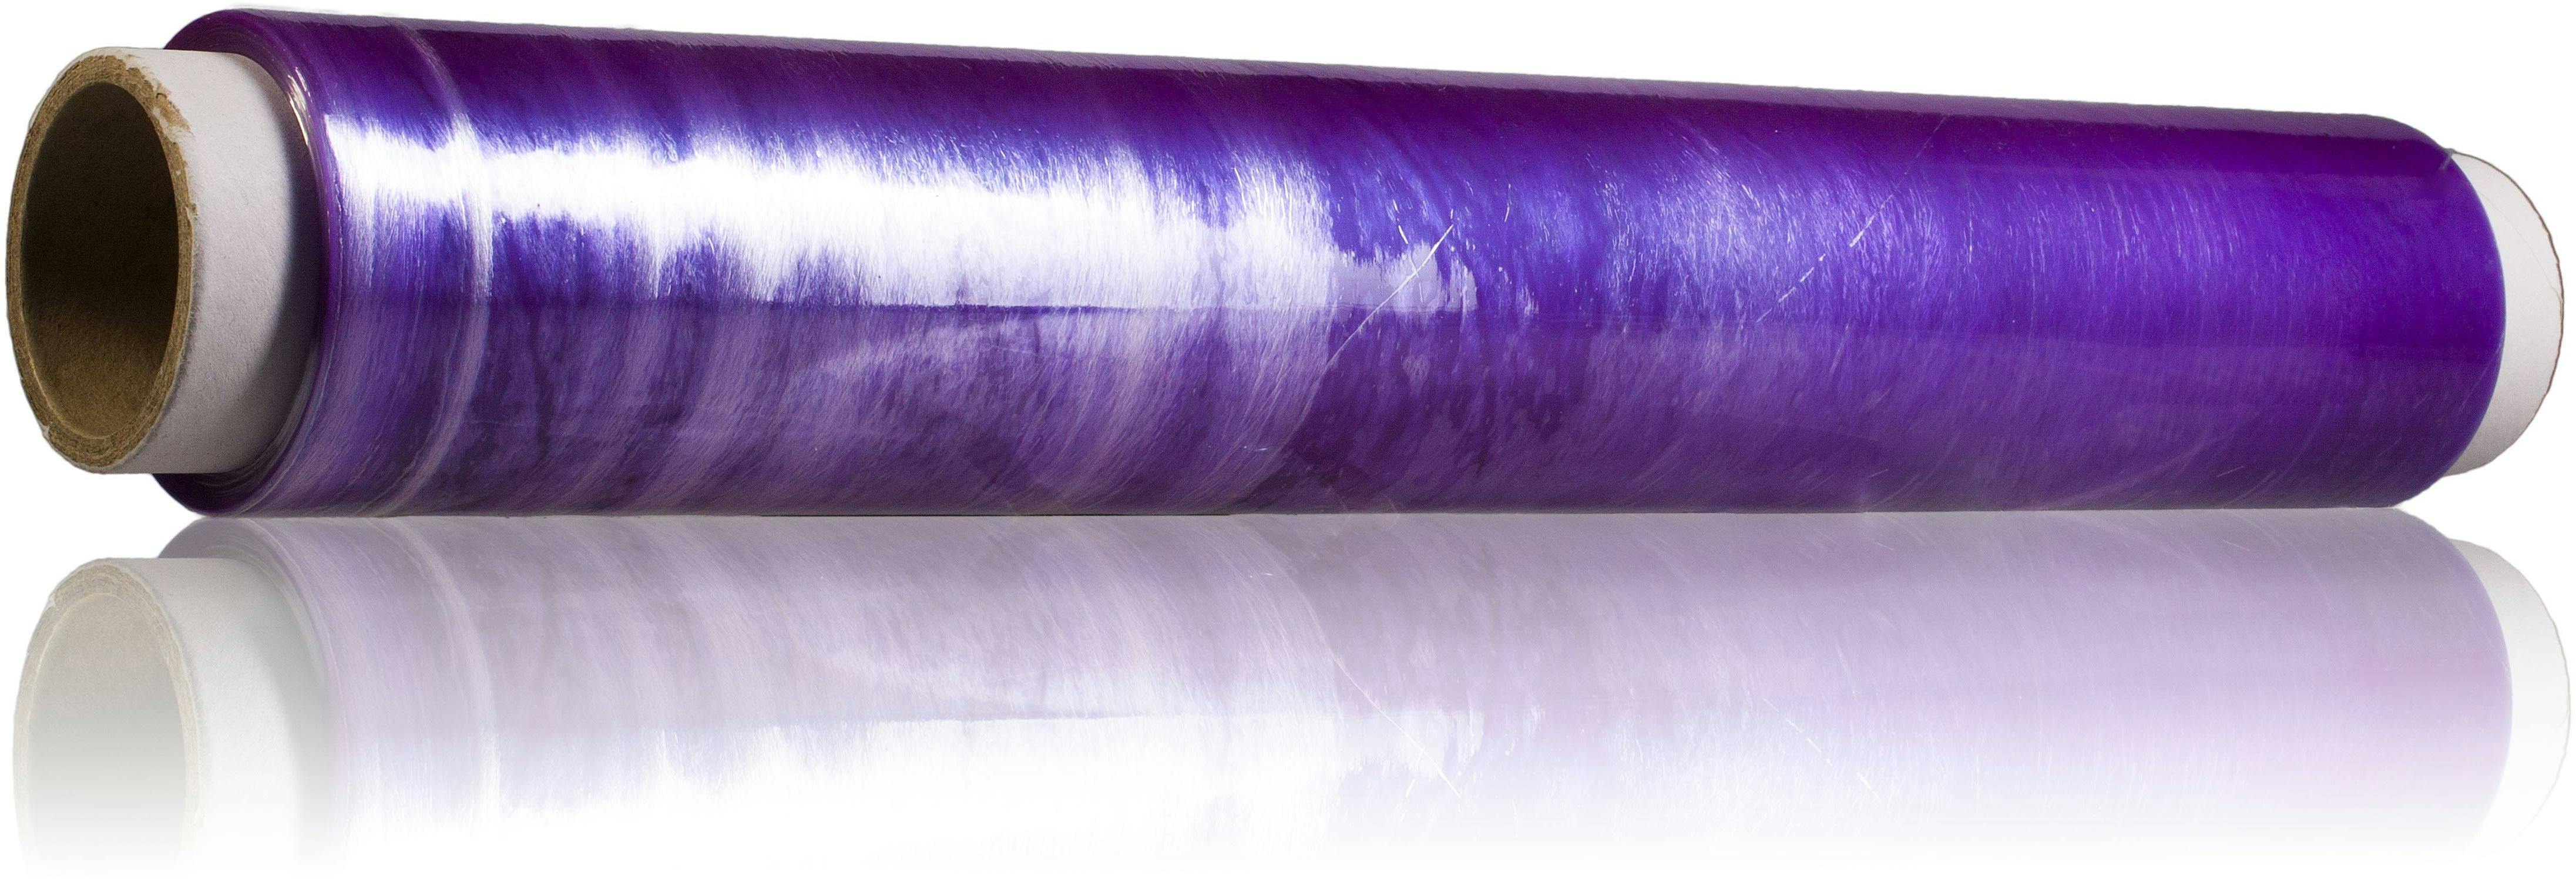 Stretchable cling film